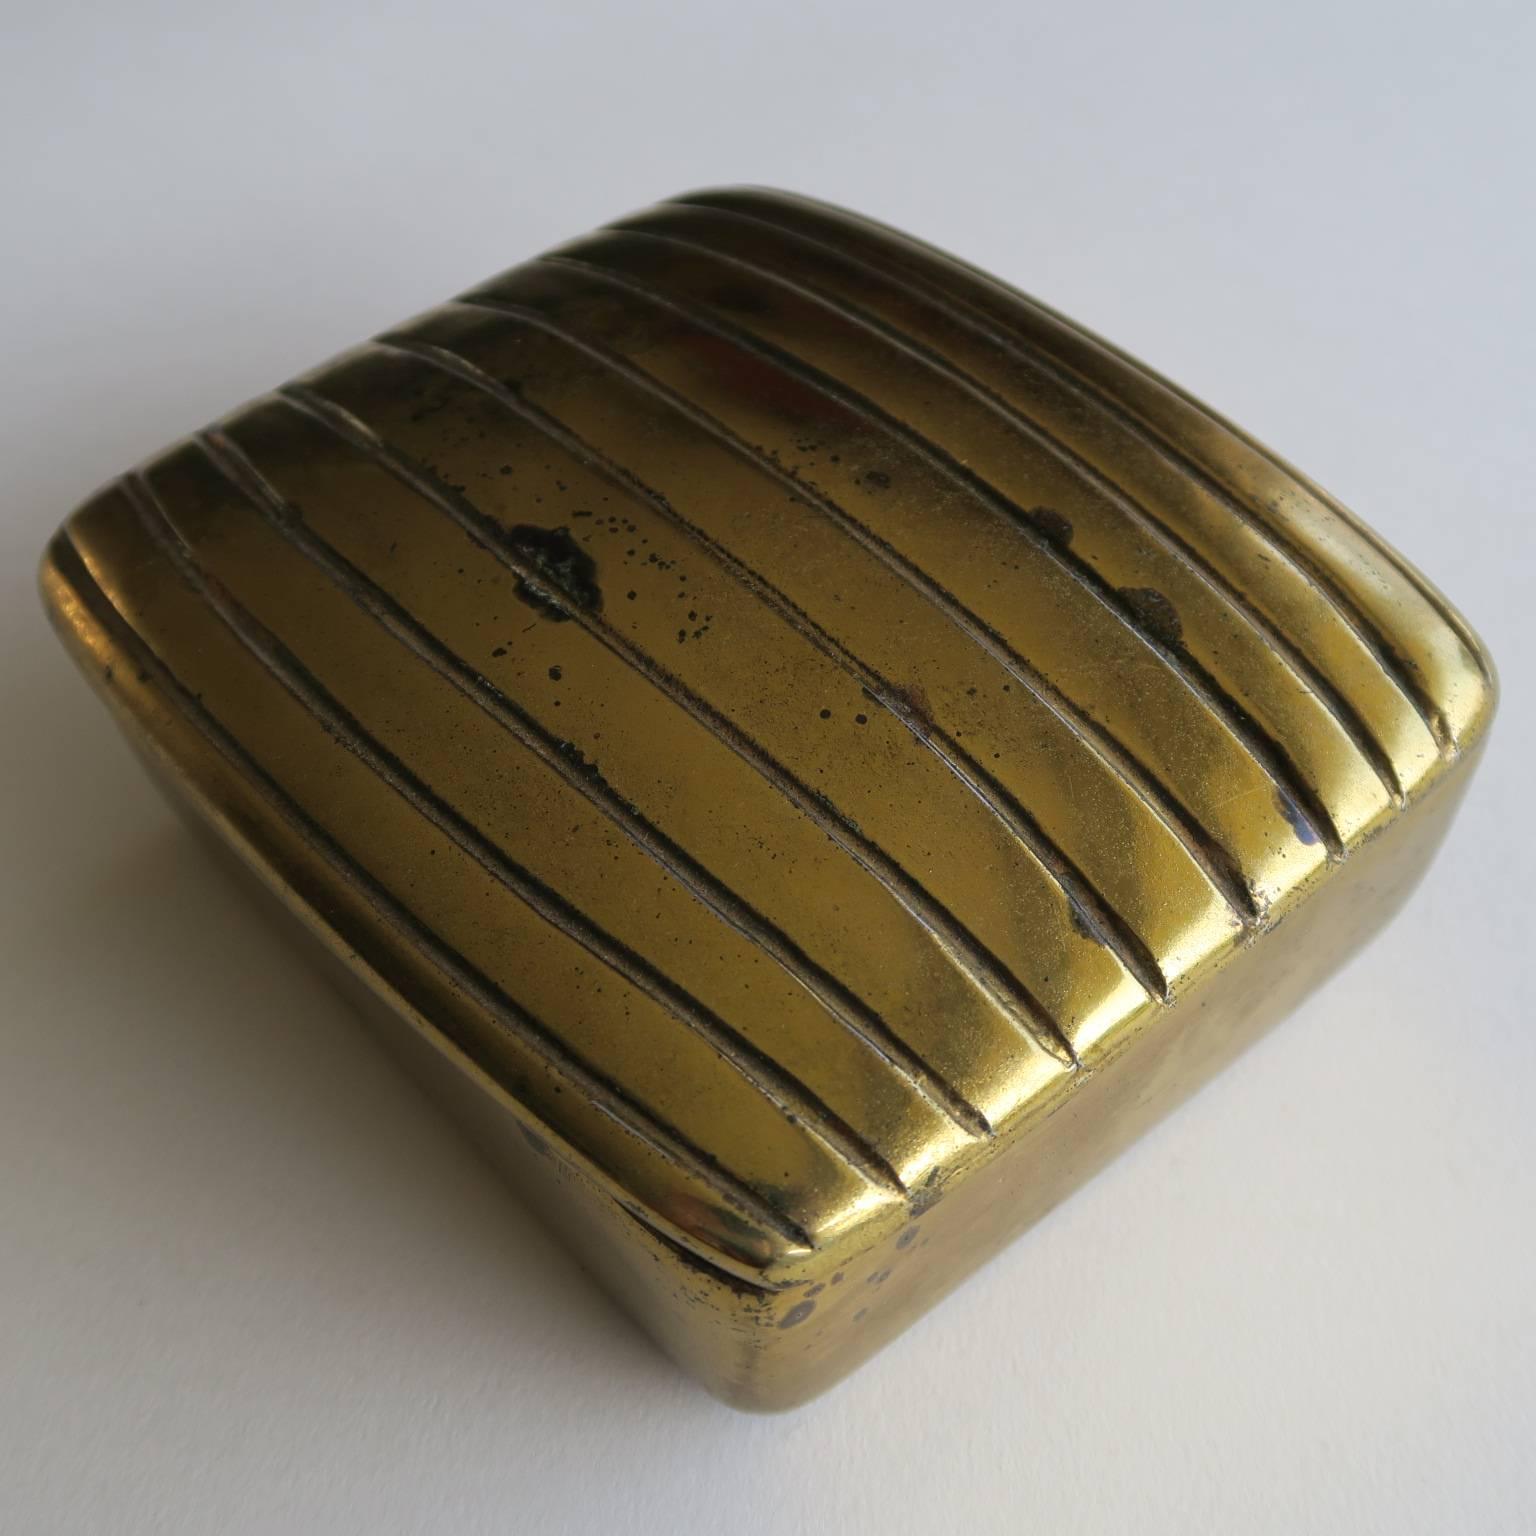 Ben Seibel box, brass-plated cast metal, cork lined interior, felted bottom, 1950s, 2 high x 4 1/2 x 4 inches.